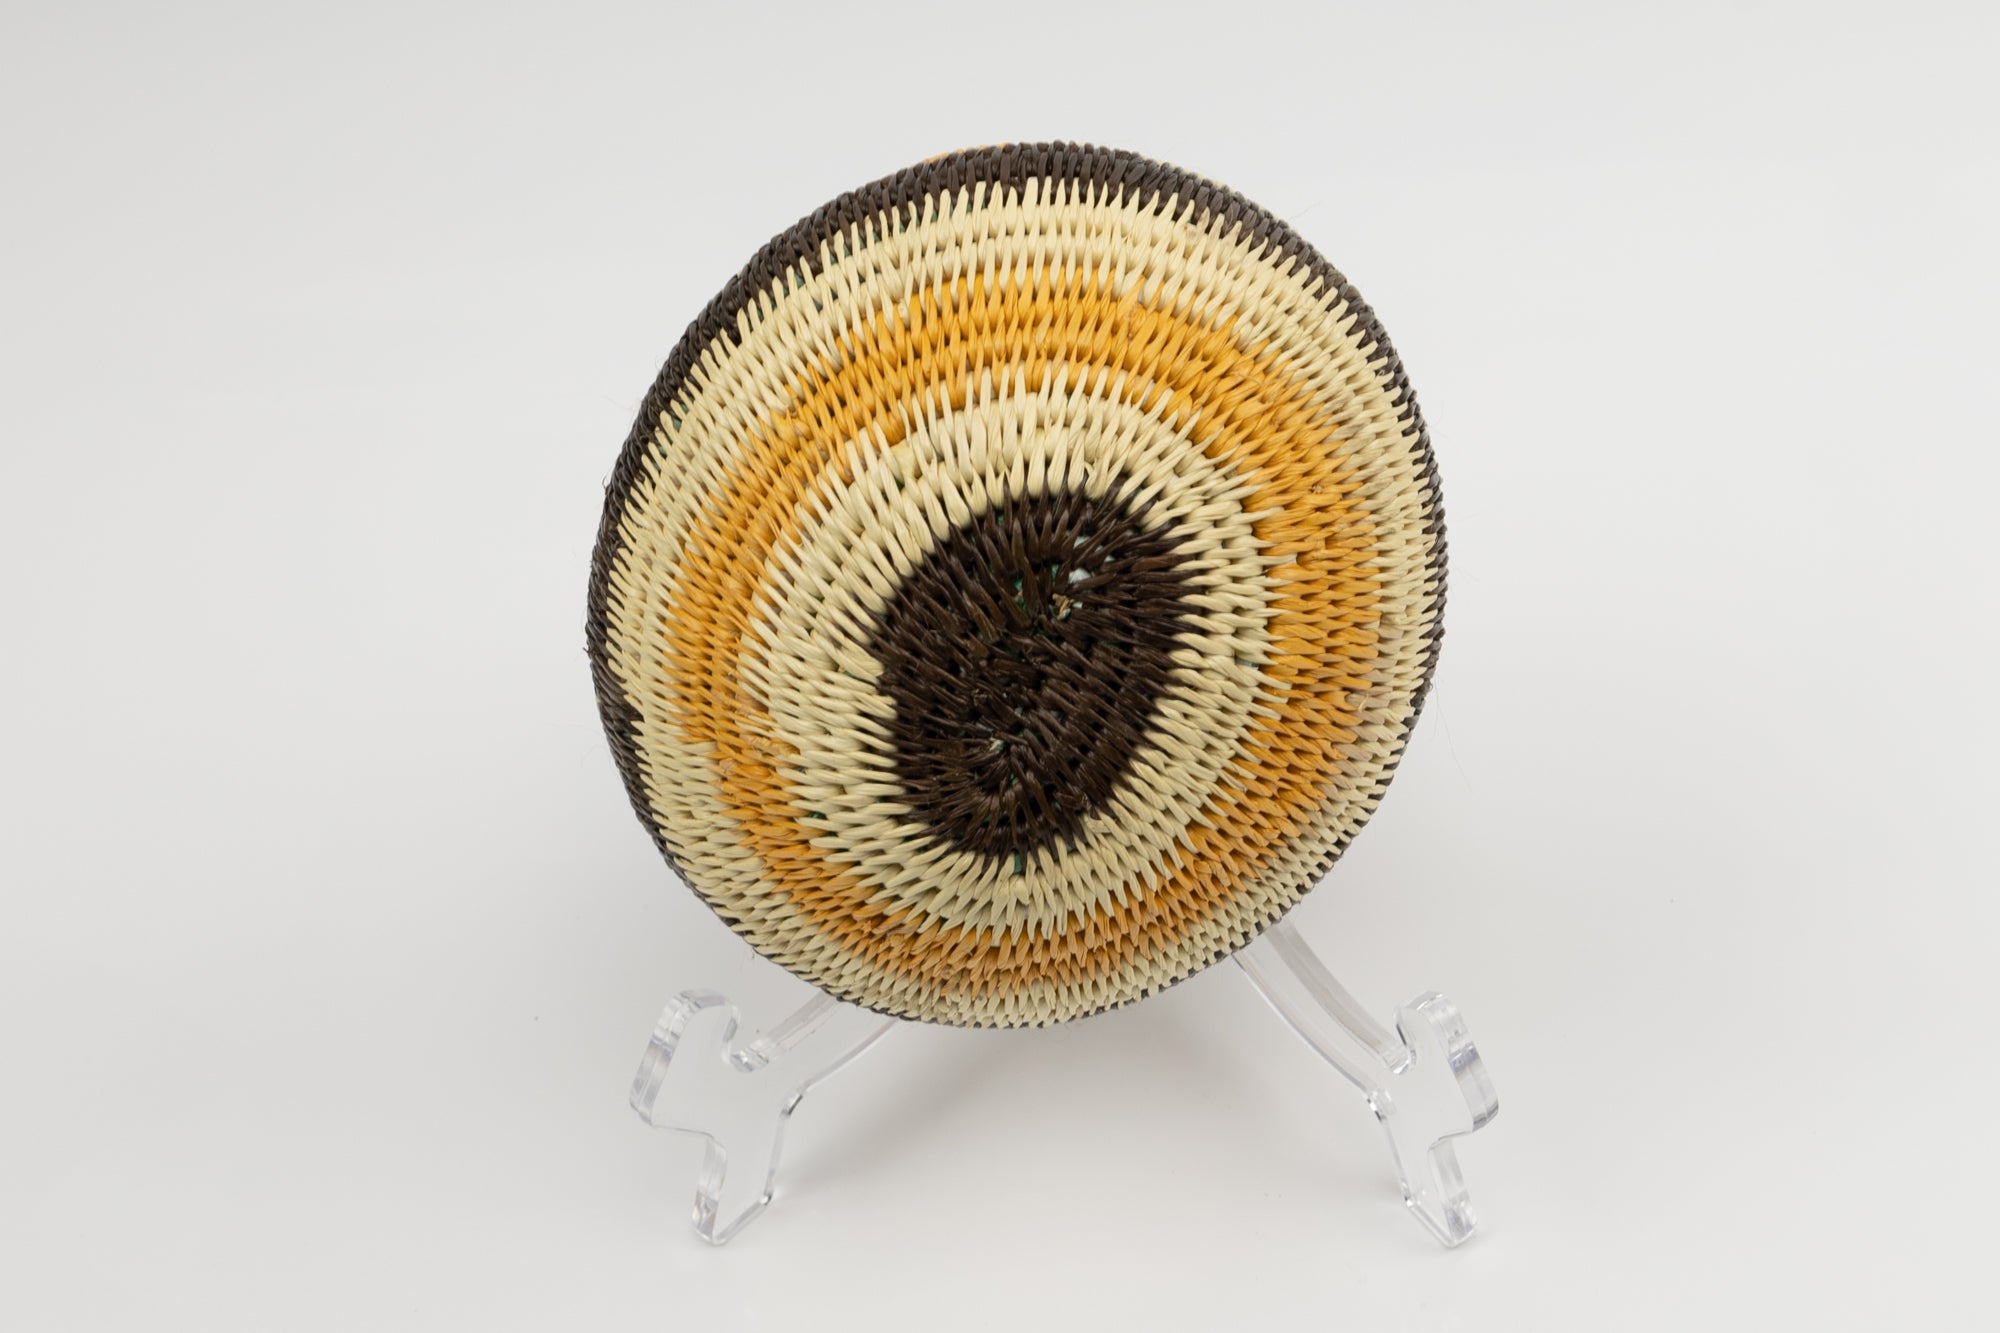 Hand Woven Vintage Basket Made By Indigenous Artisans